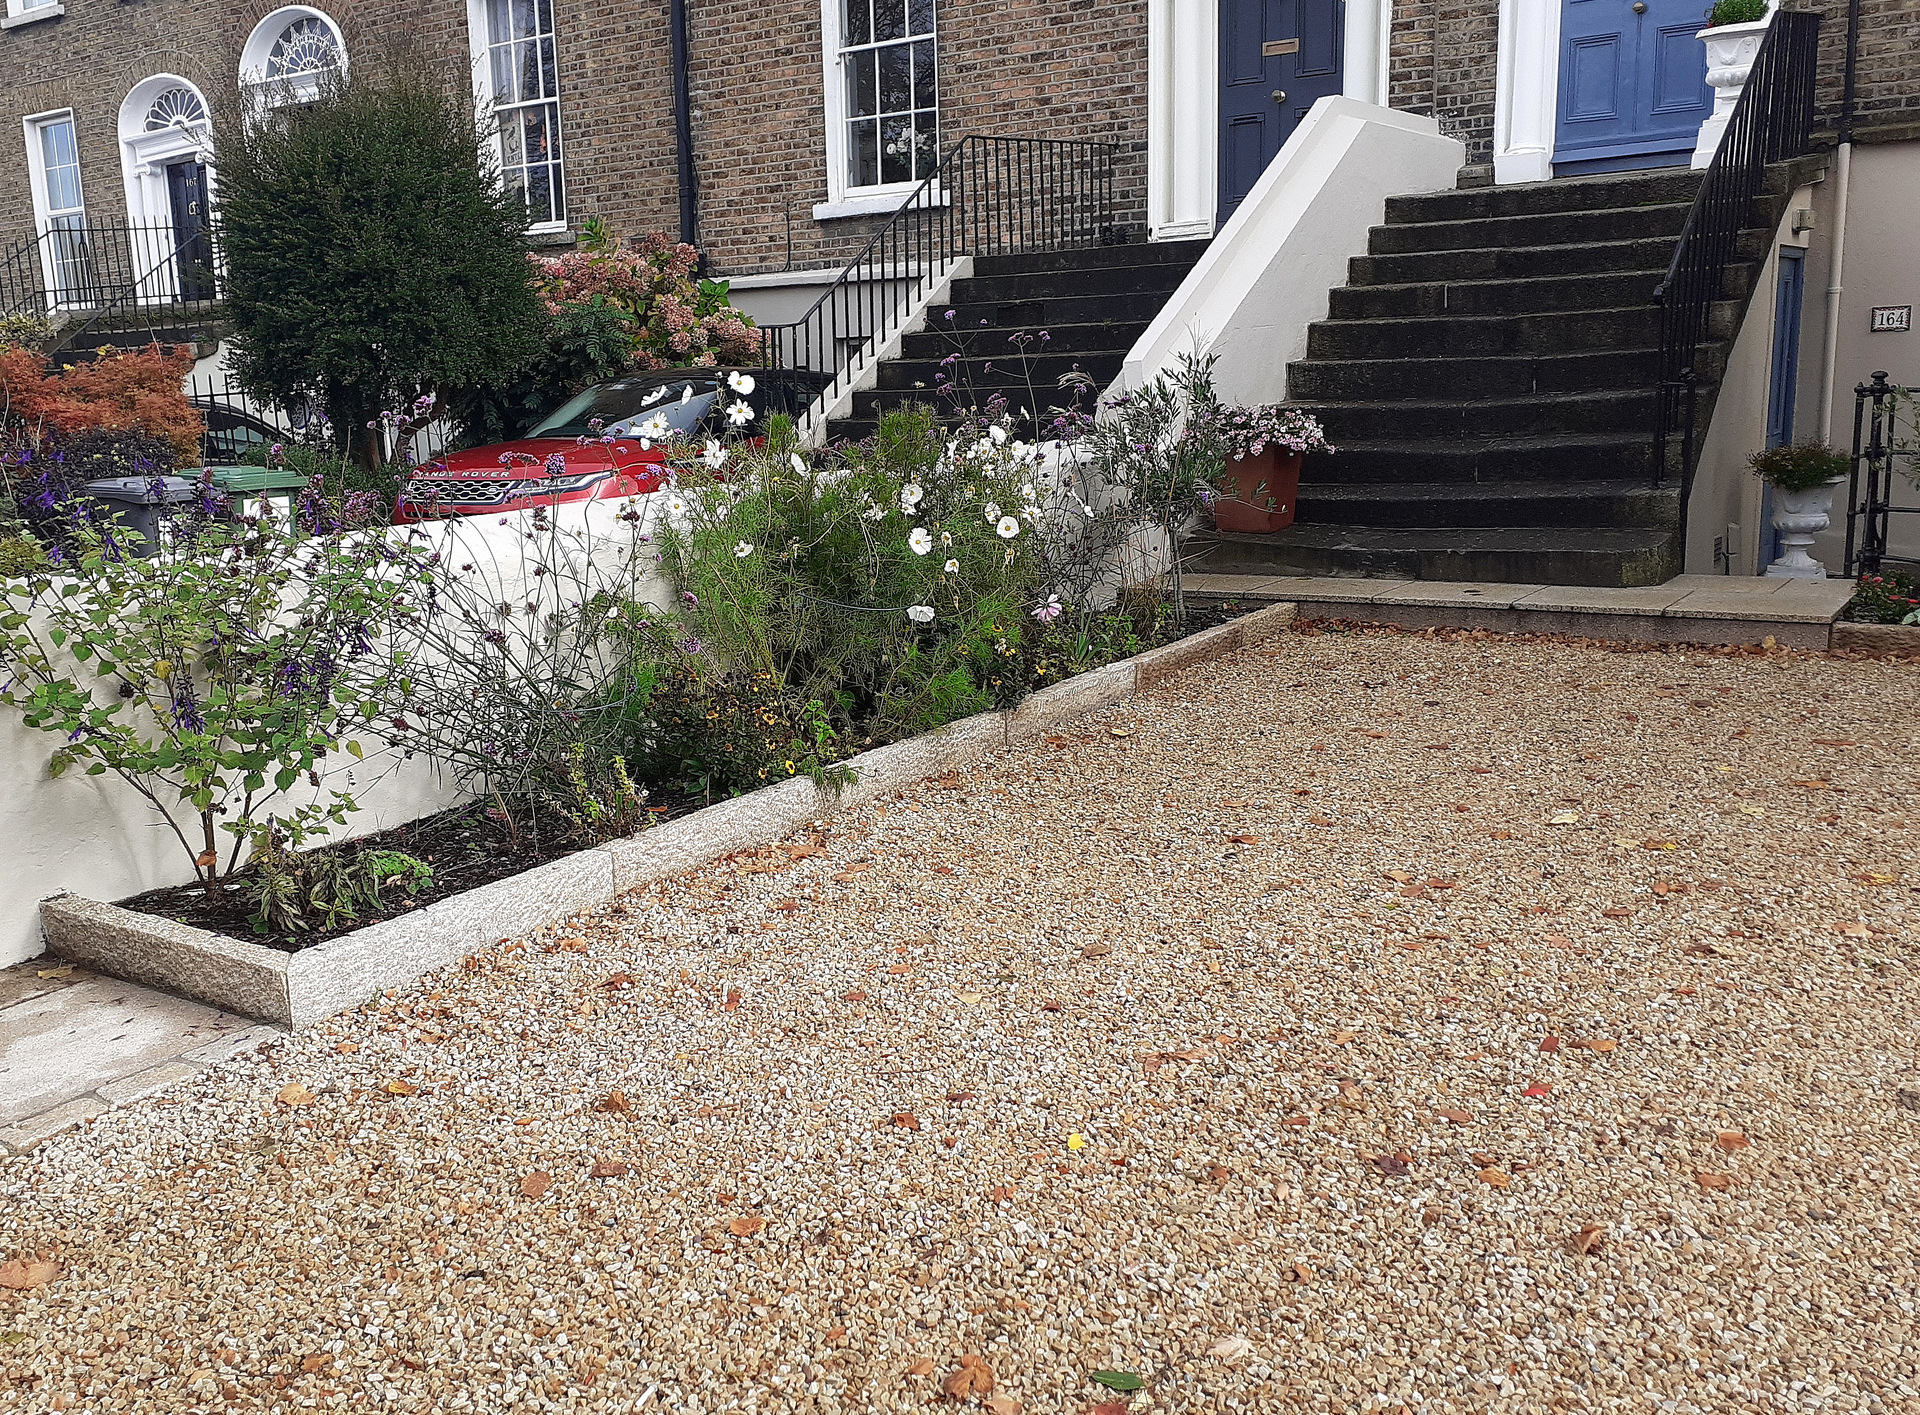 Driveway installation in Rathgar, Dublin 6 featuring entrance in yellow granite setts, borders edged with yellow granite kerbing & surface finished ballylusk stone chippings  | Owen Chubb Garden Design & Landscaping, Tel 087-2306128